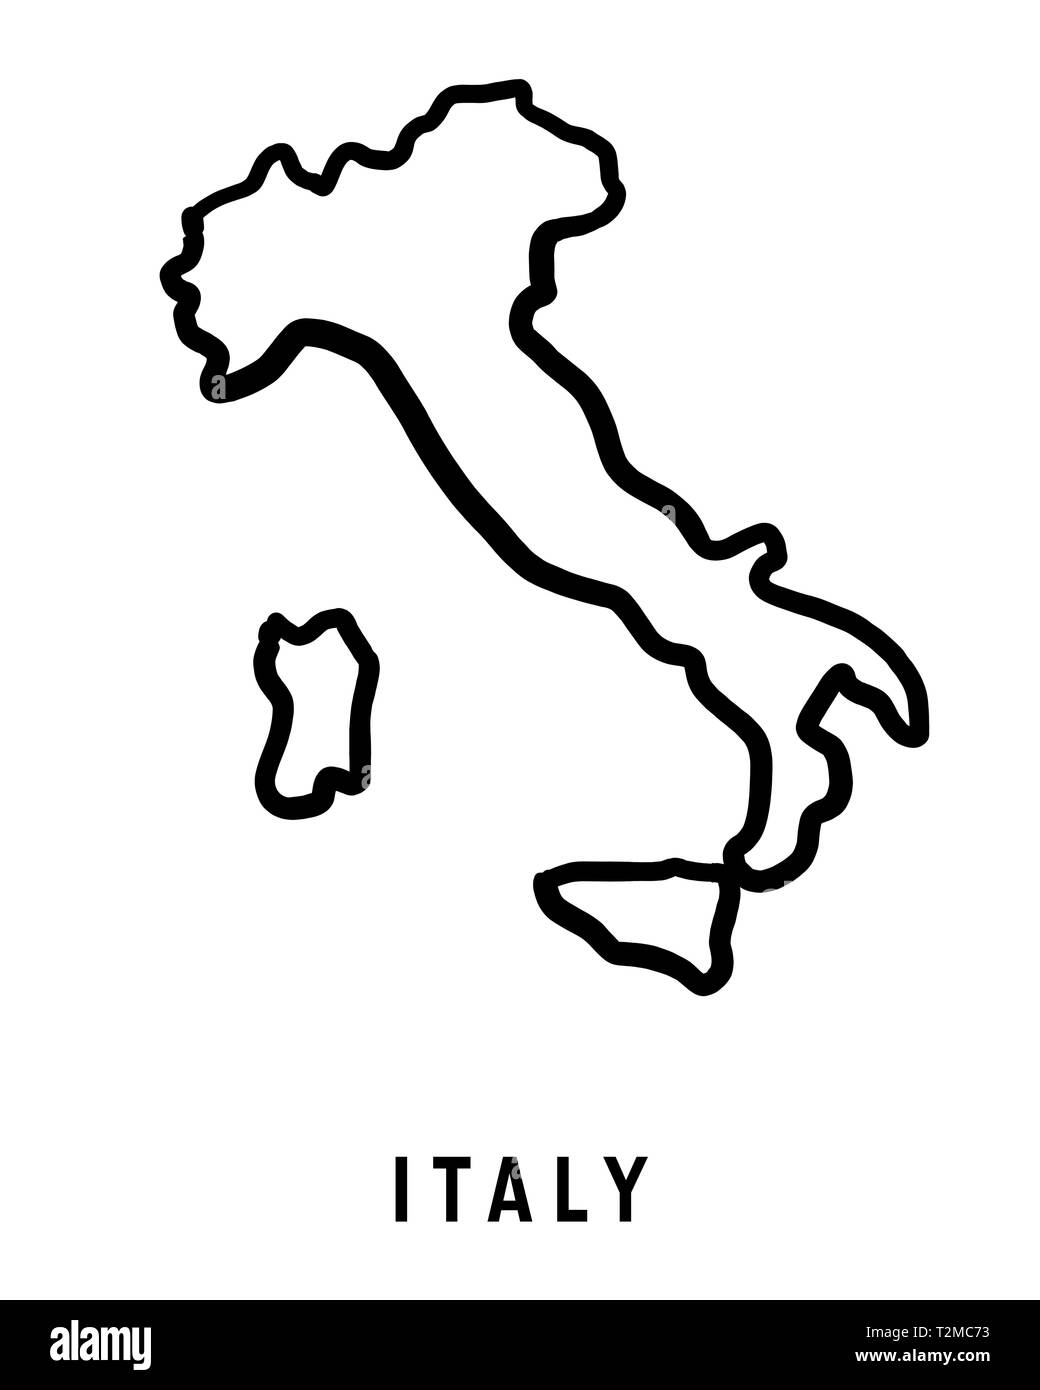 https://c8.alamy.com/comp/T2MC73/italy-map-outline-smooth-country-shape-map-vector-T2MC73.jpg